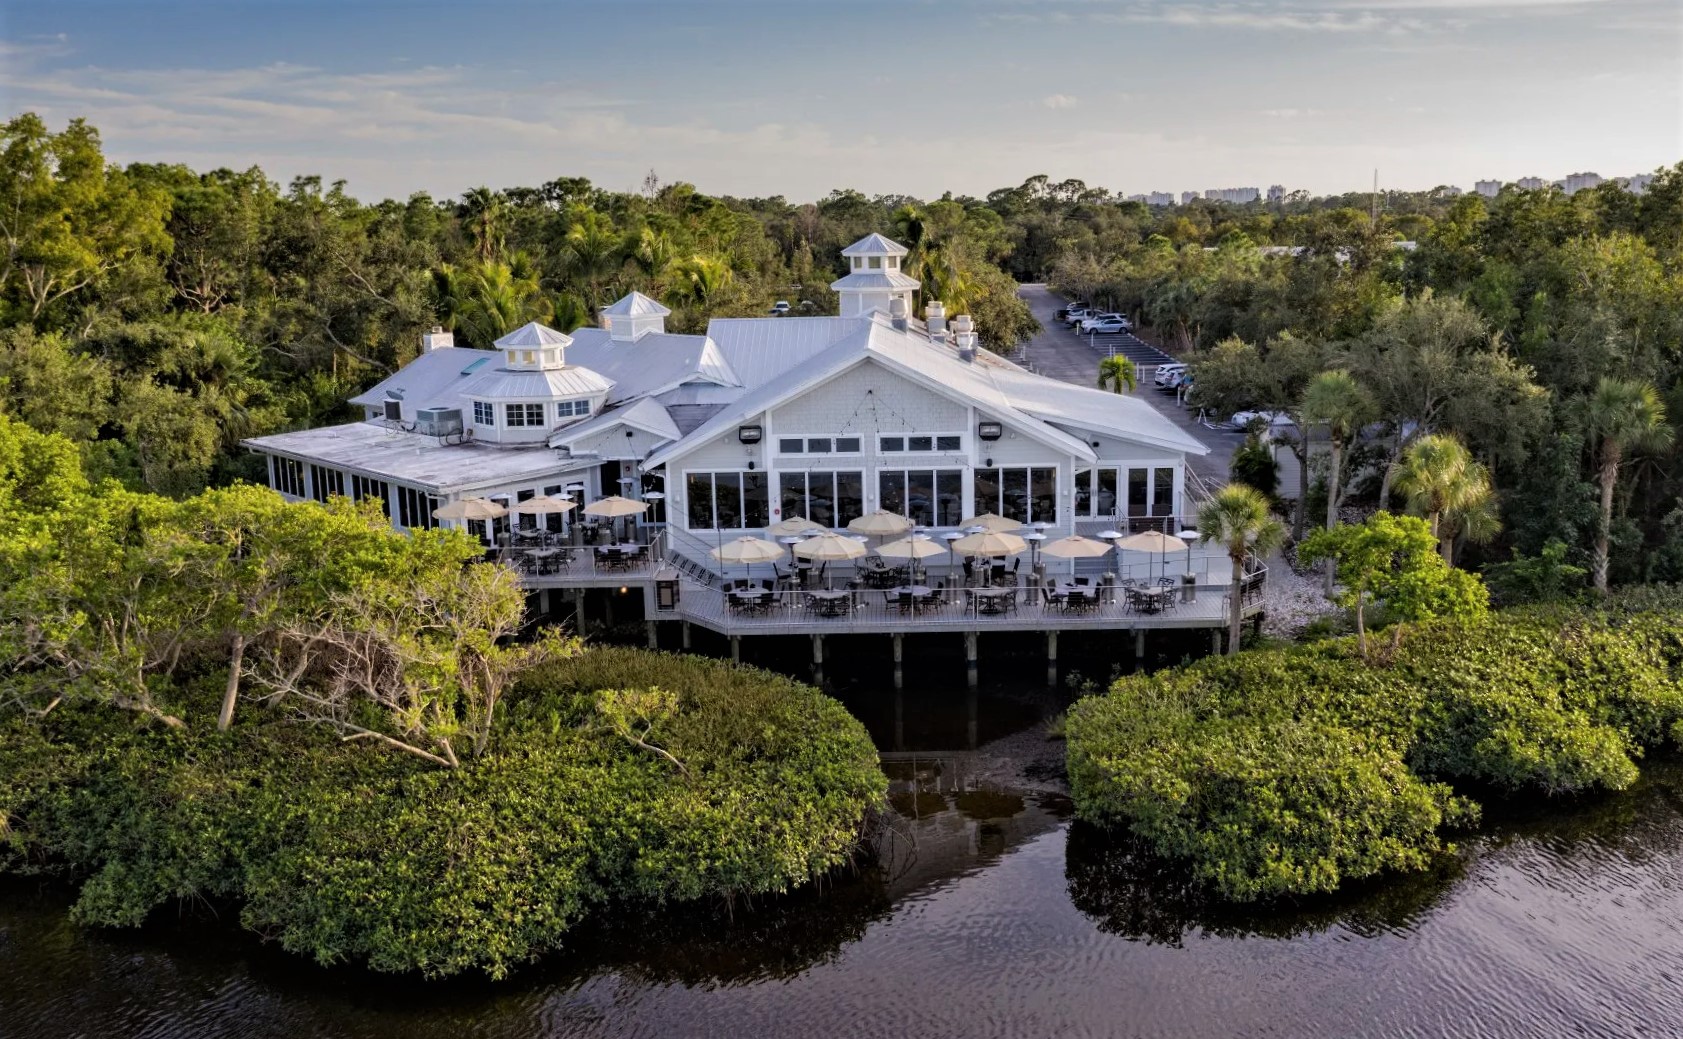 Bay House restaurant in North Naples sells for $7.5M to Phelan Family Brands - Gulfshore Business